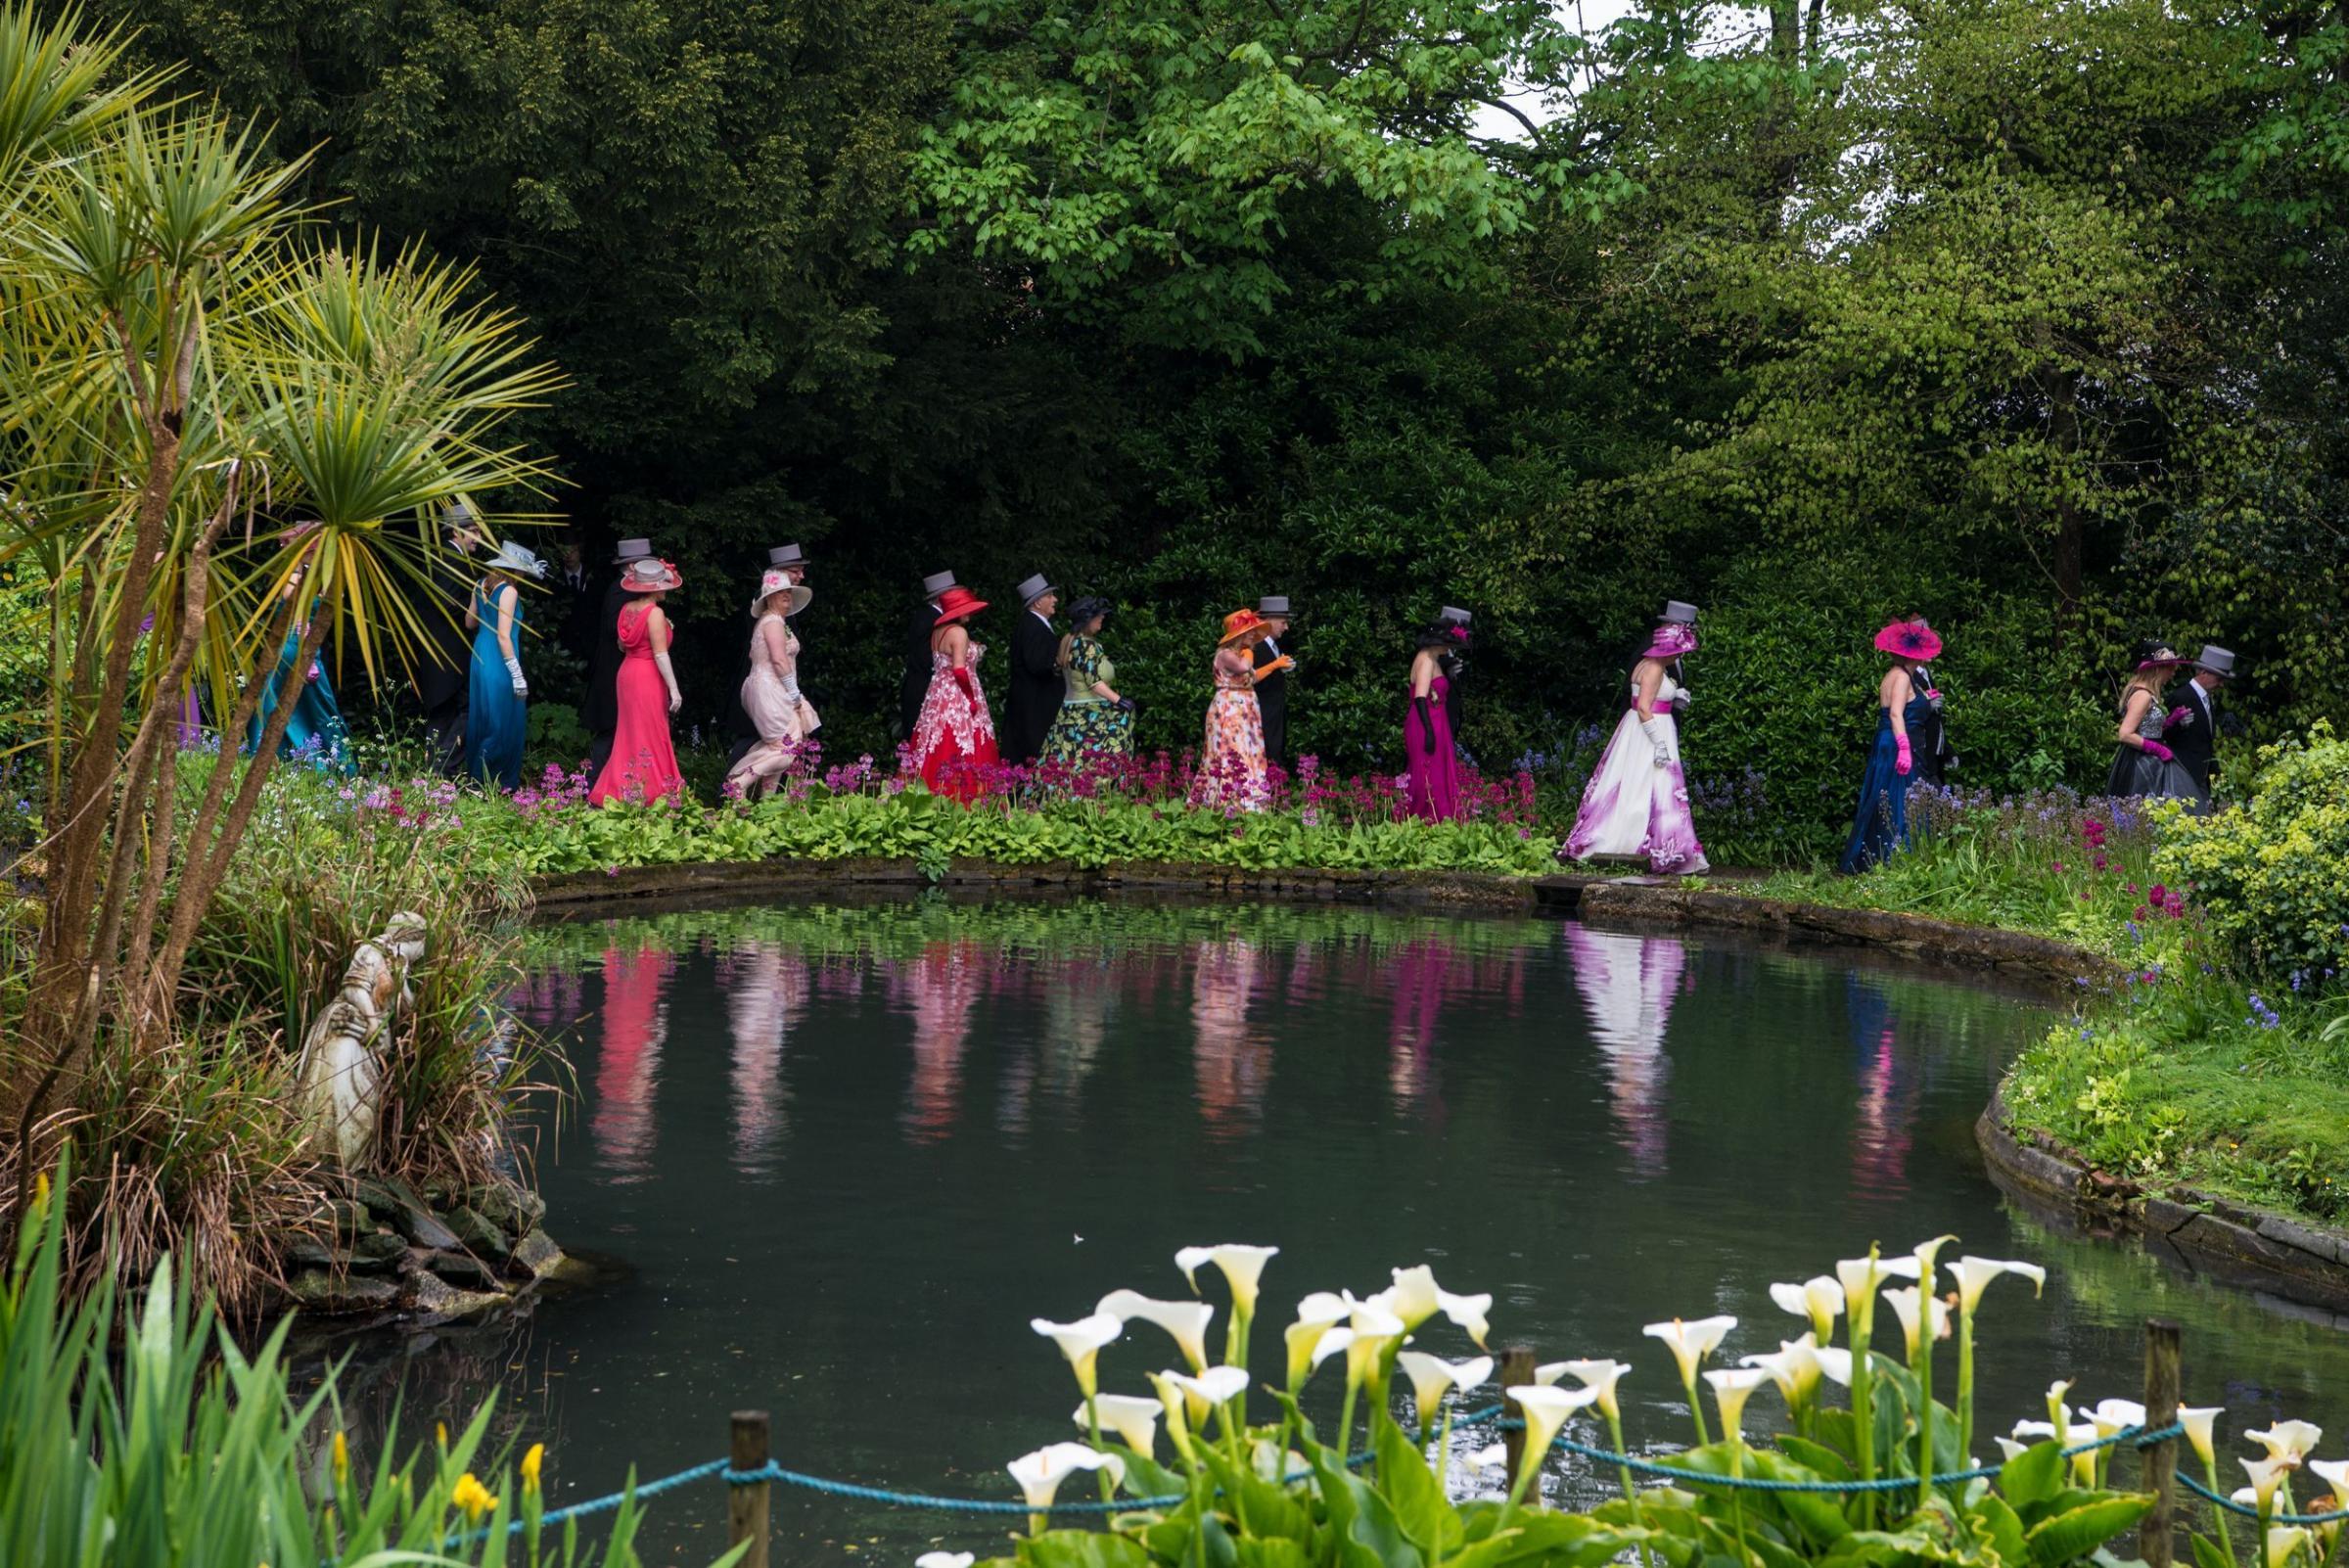 Lismore House and its grounds are famous for being danced through on Flora Day